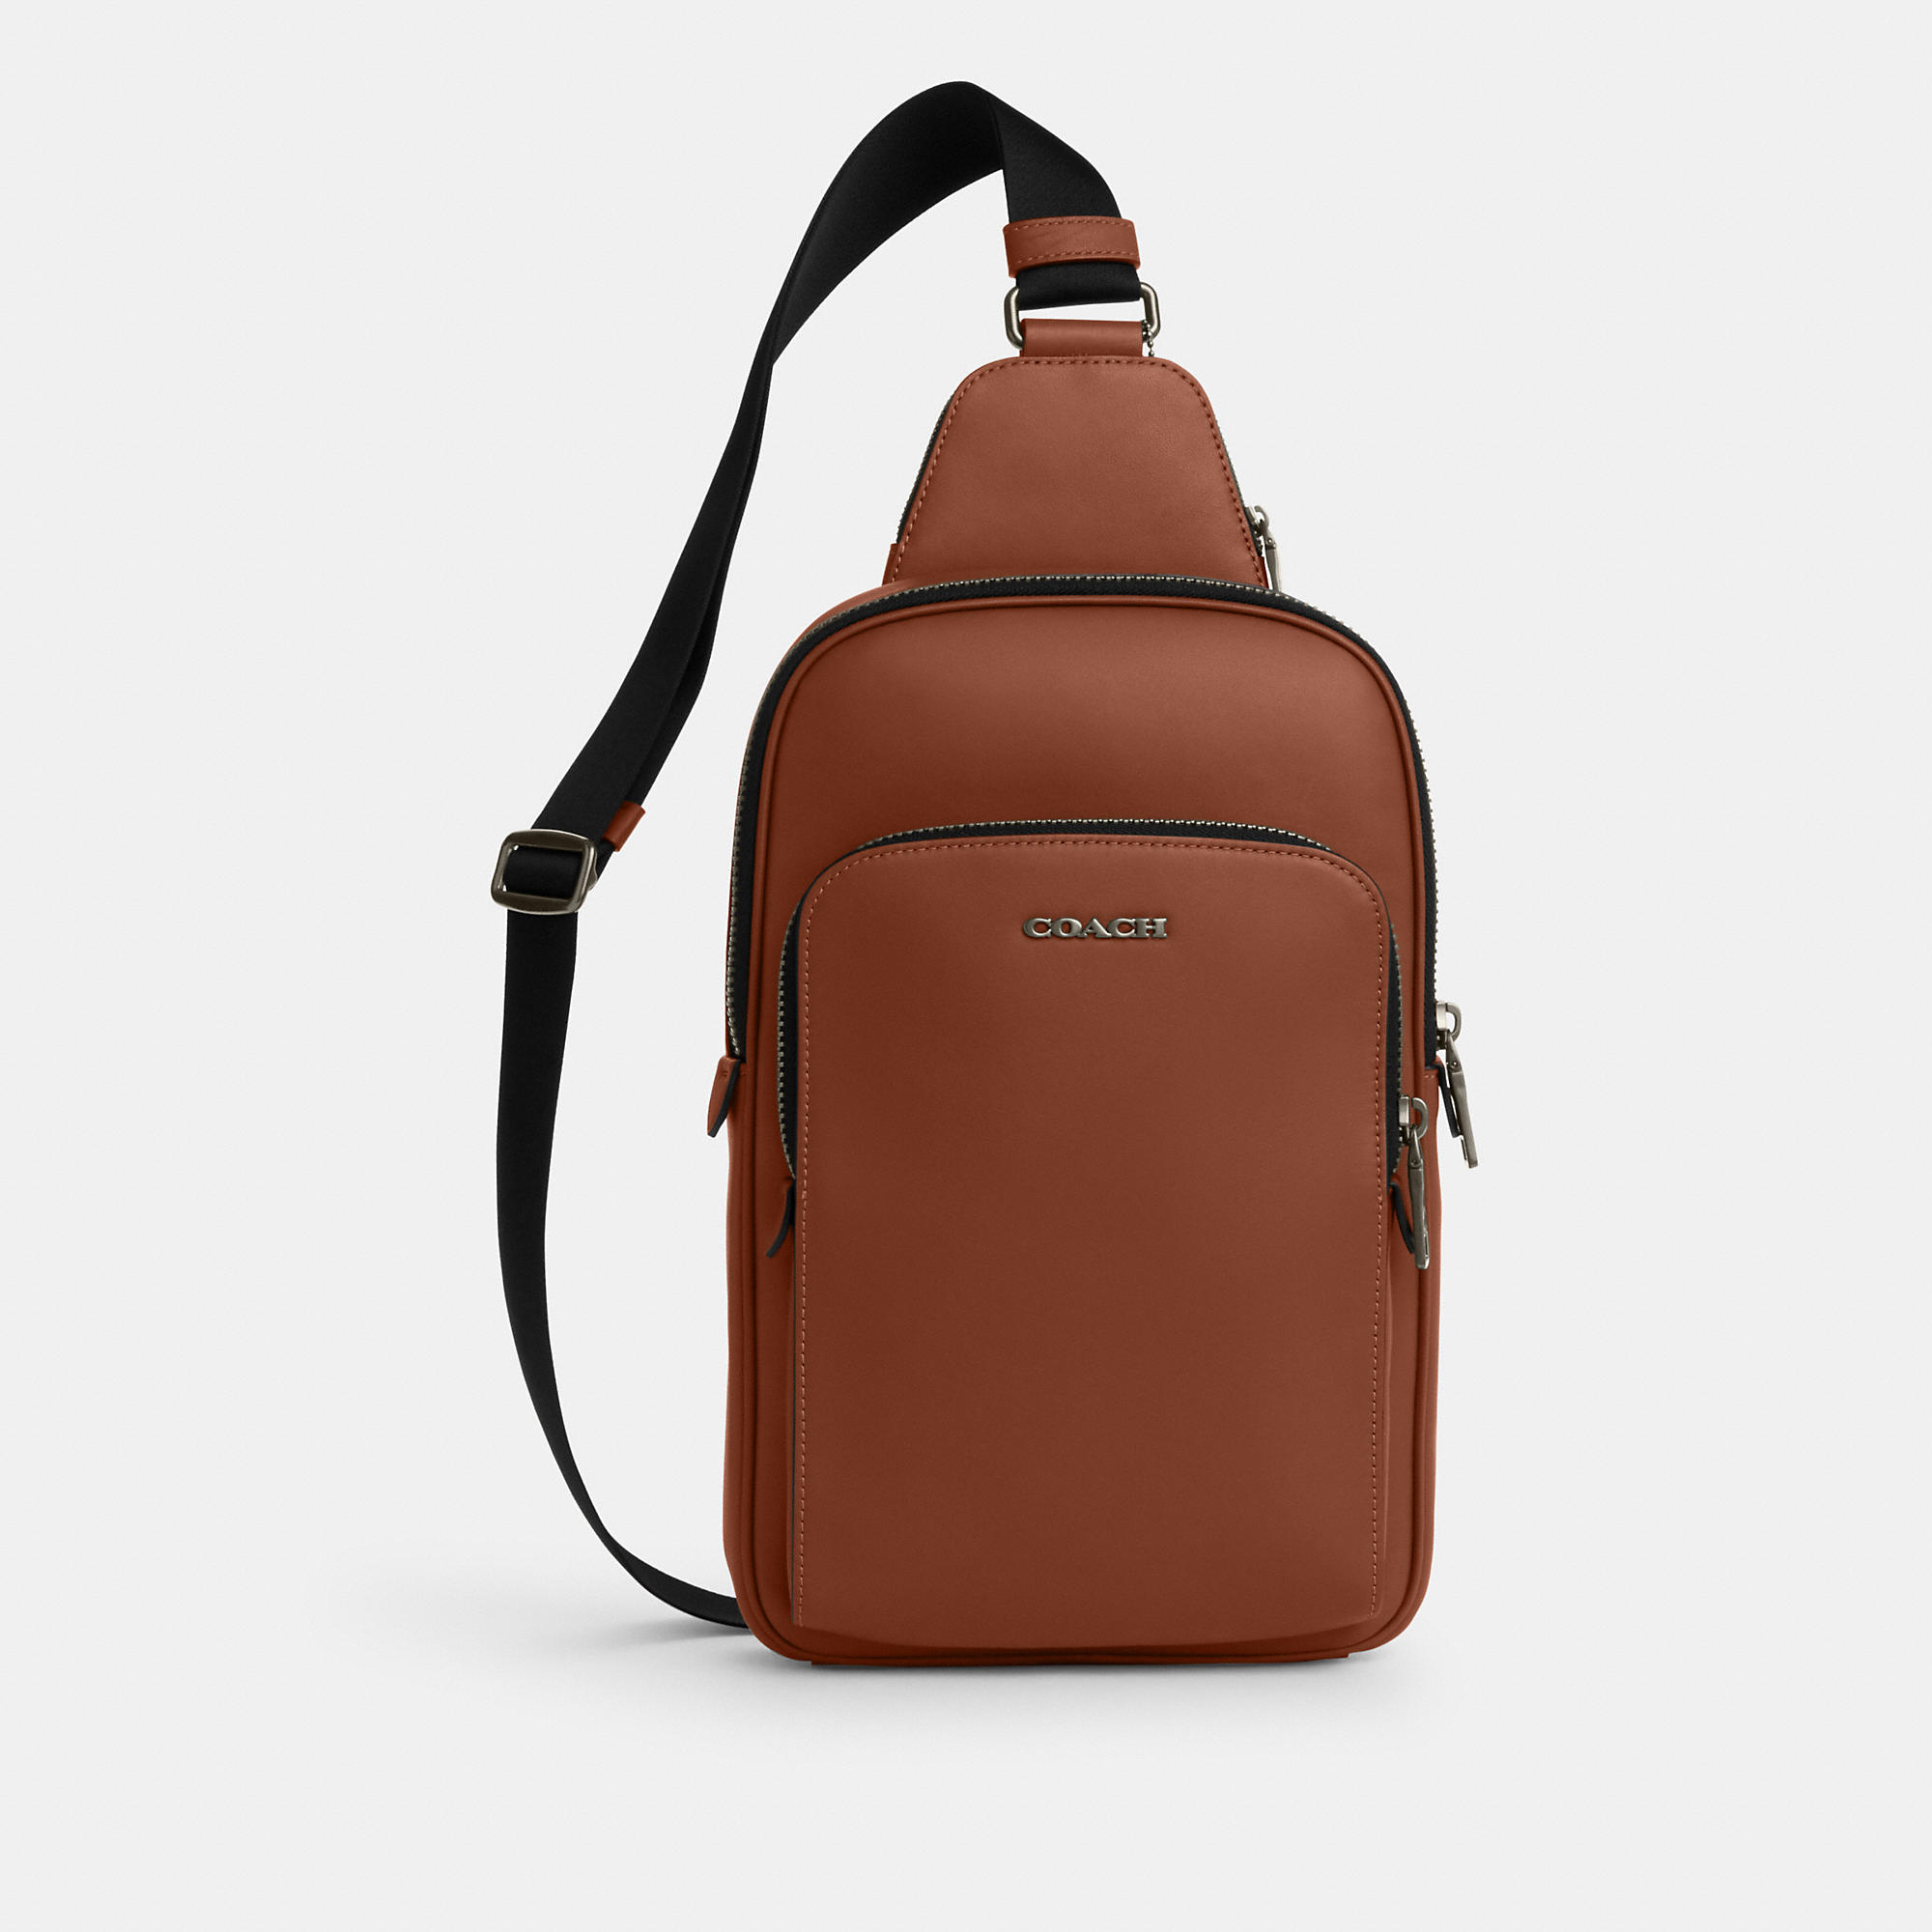 Coach Outlet Ethan Pack In Brown